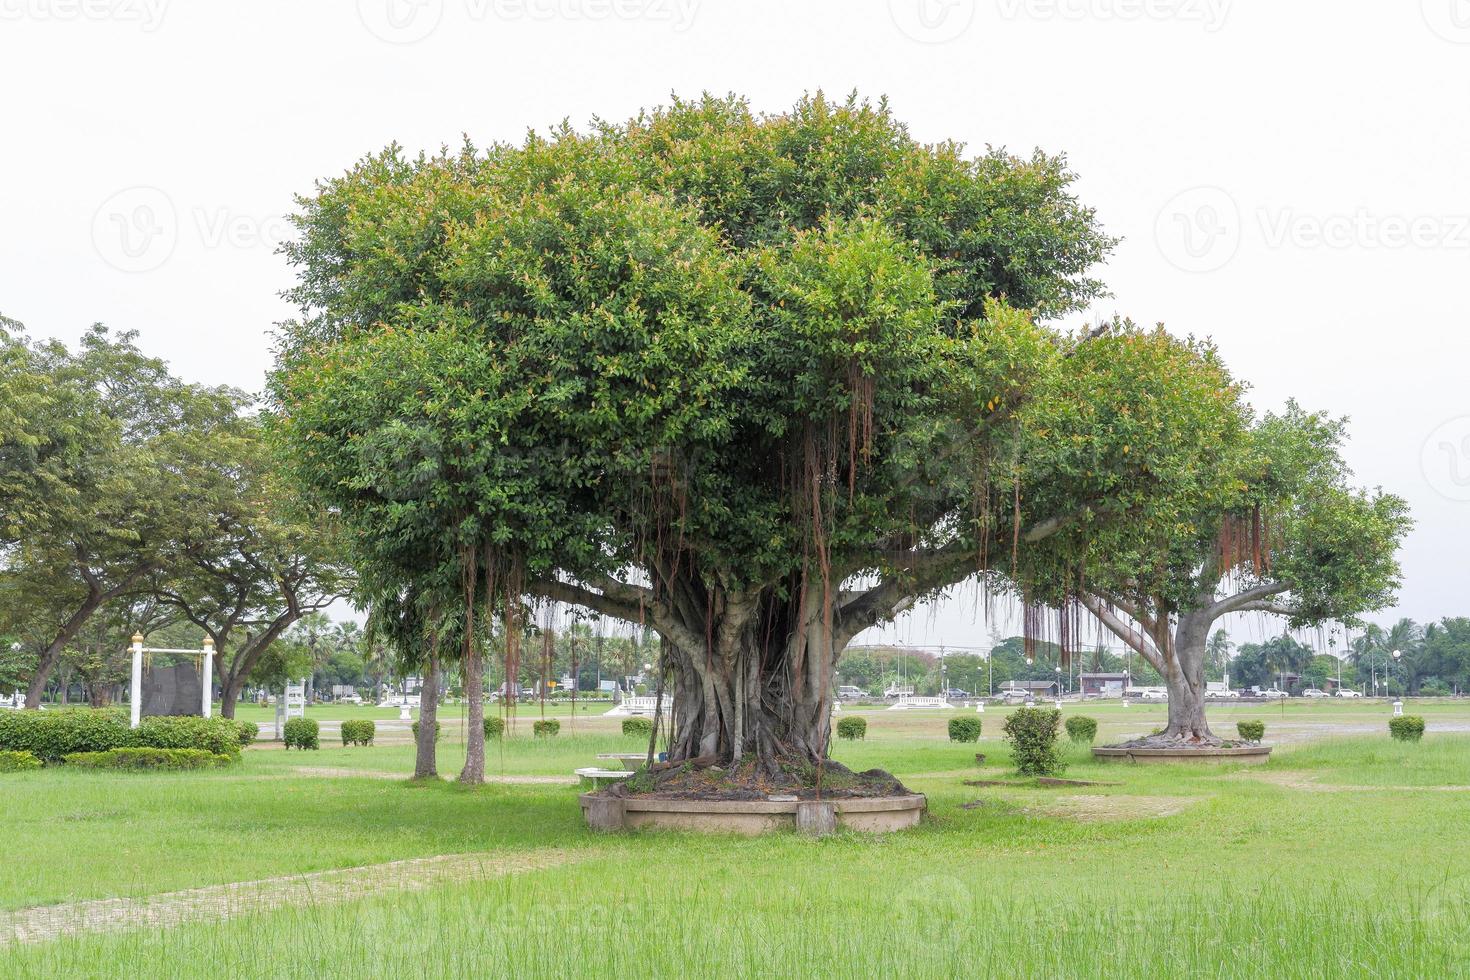 giant banyan tree Planted in concrete pots, in a park full of grass. photo